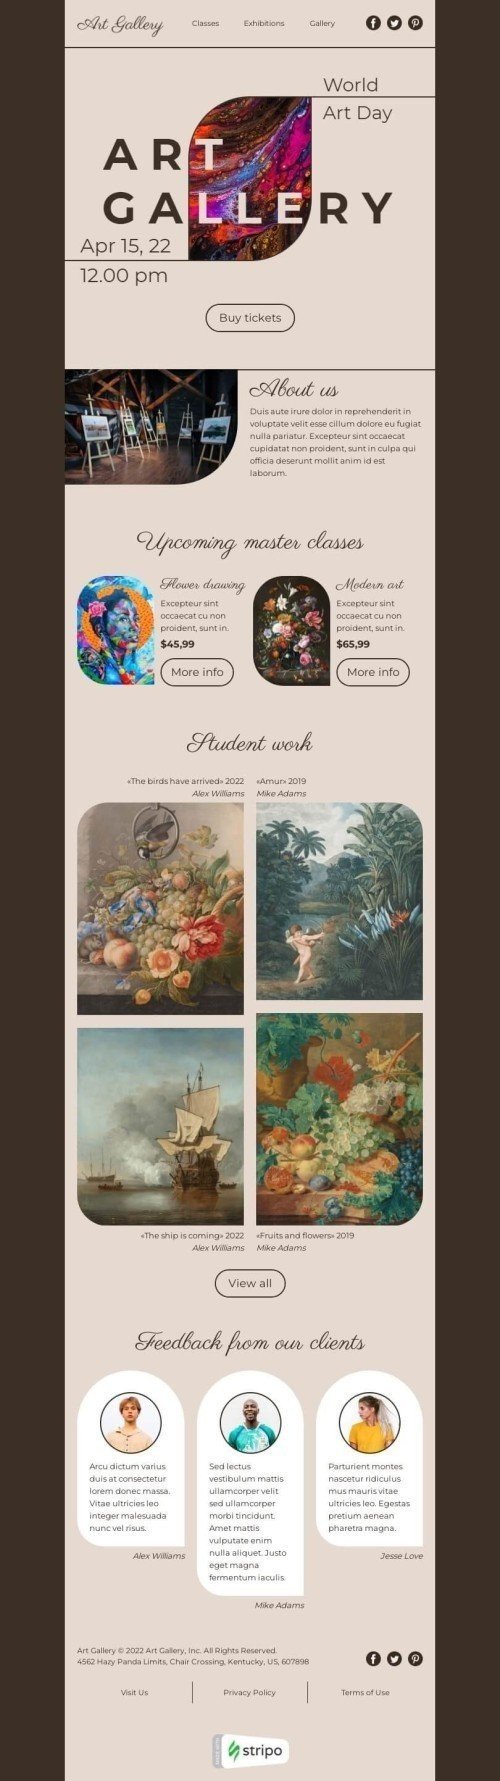 World Art Day Email Template "Art Gallery" for Art Gallery industry mobile view